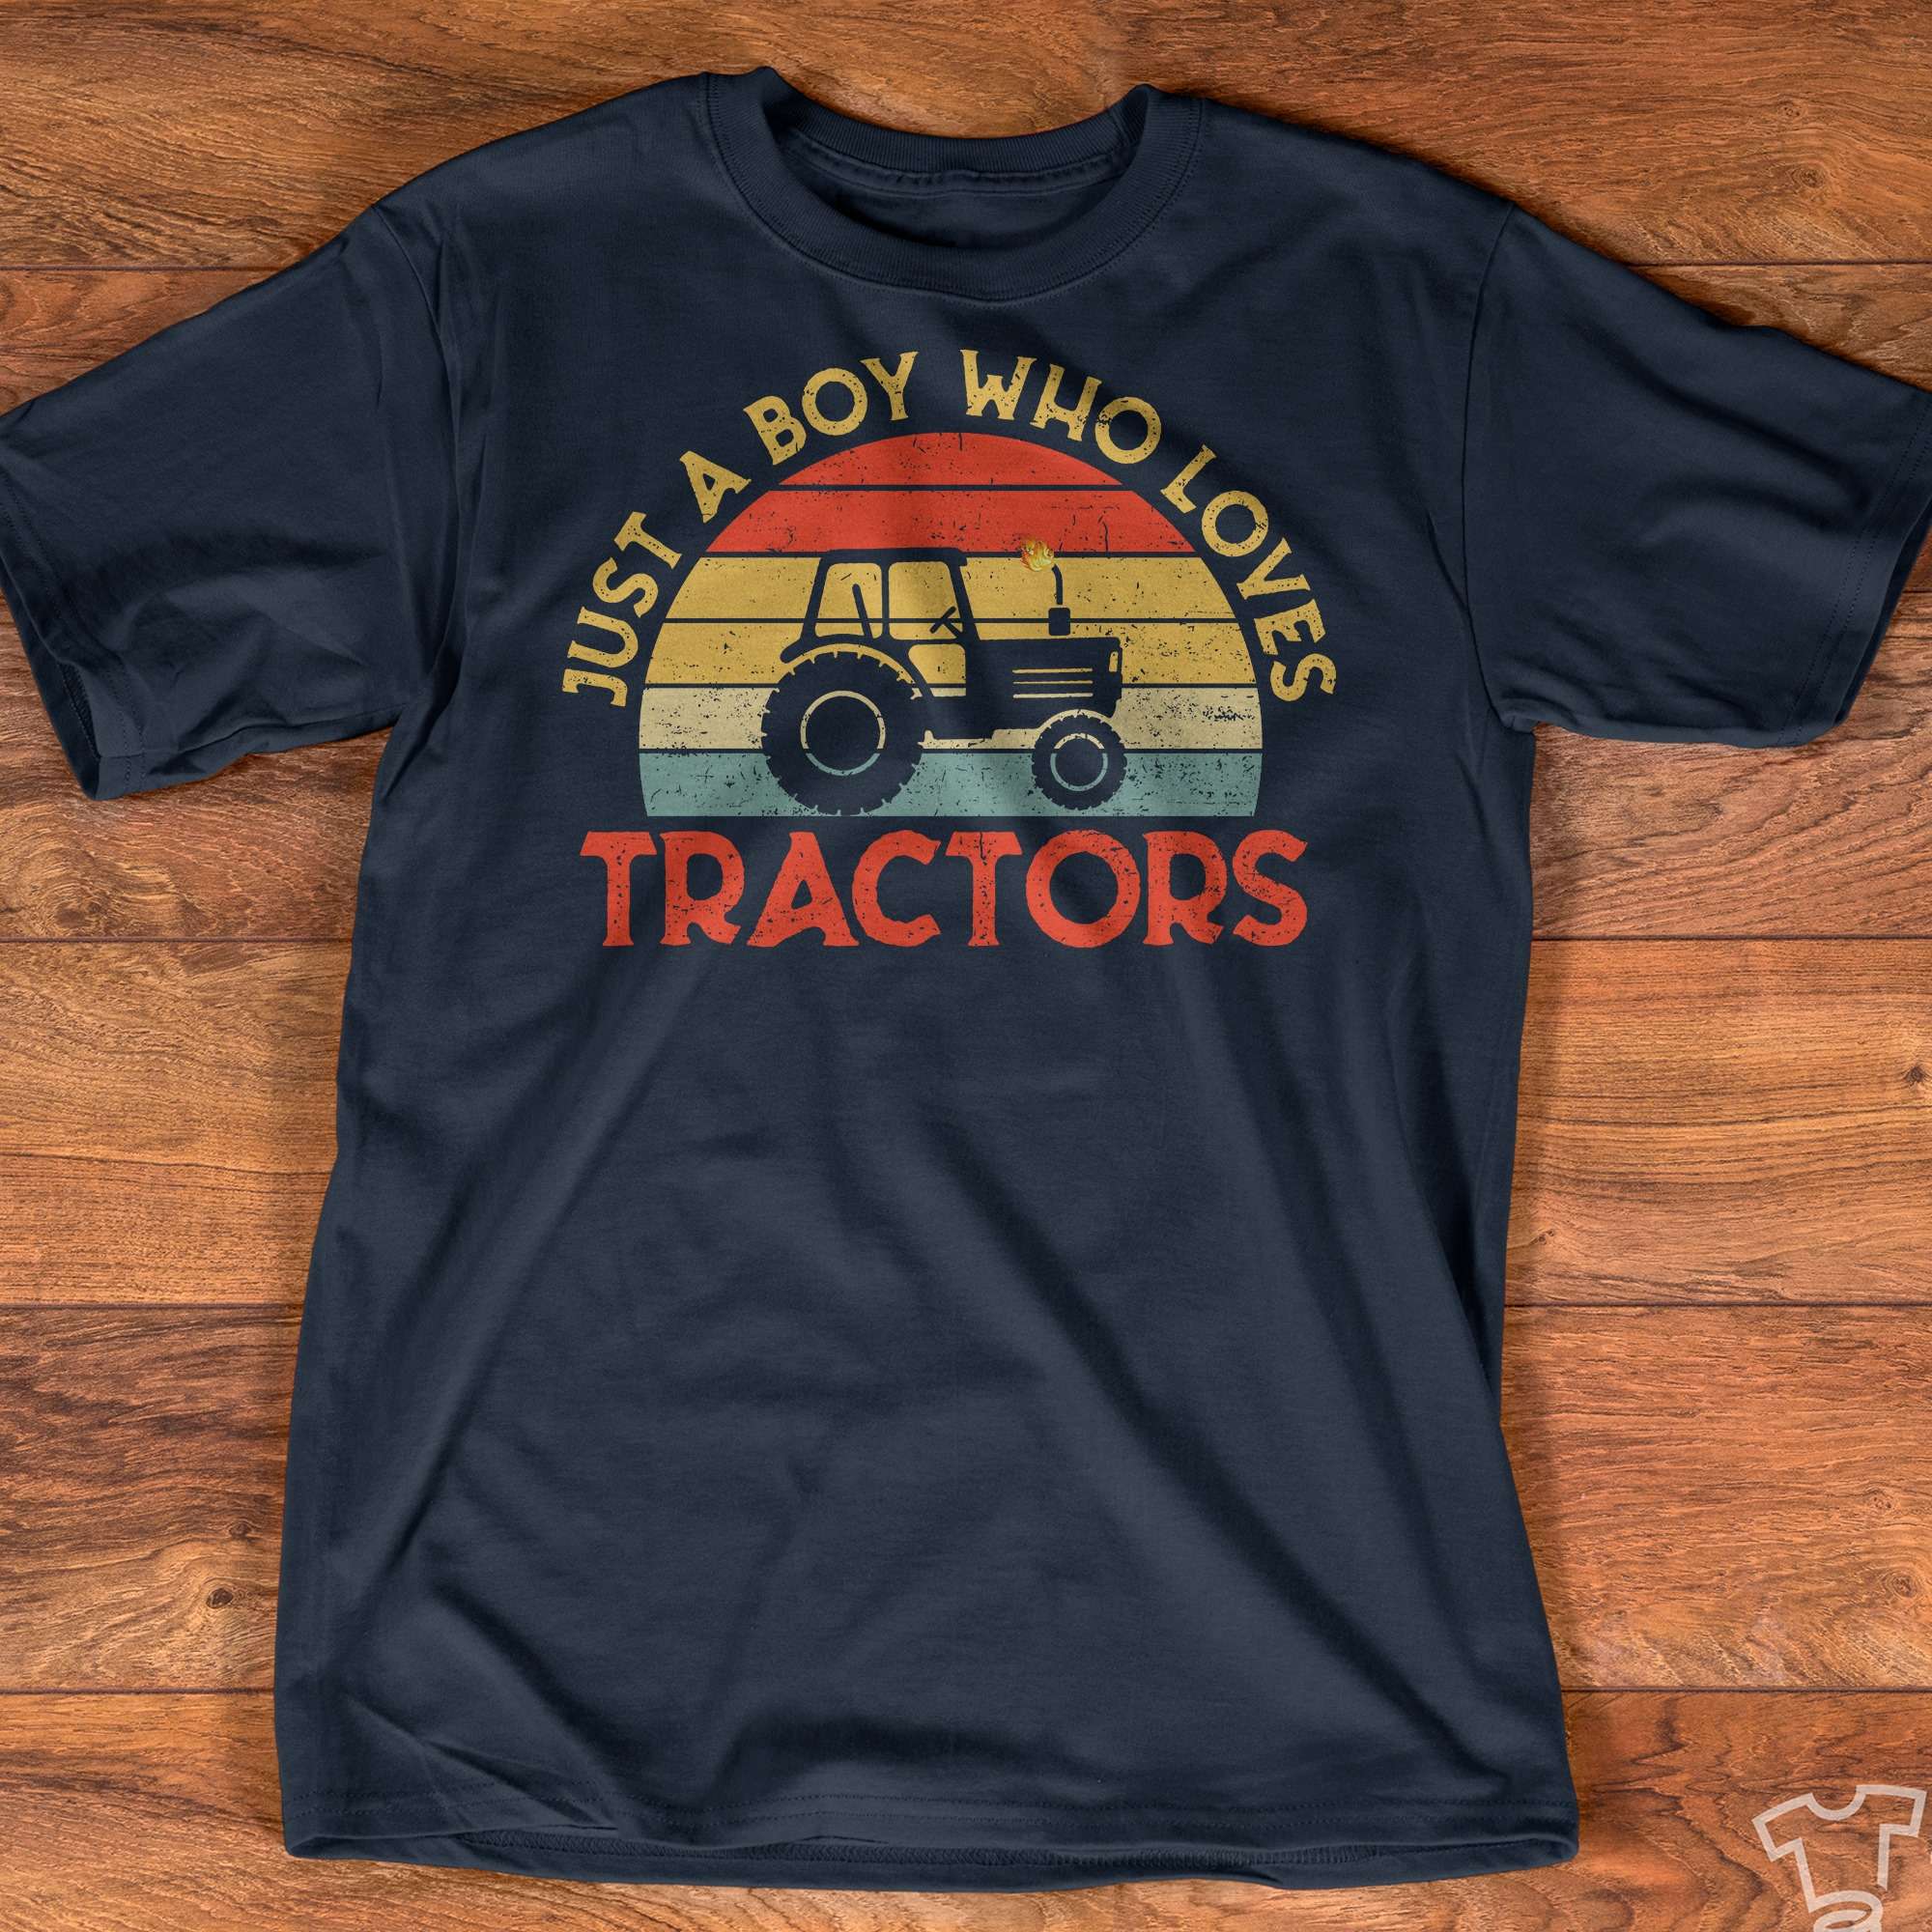 Just a boy who loves tractors - Tractor of farmer, tractor driver